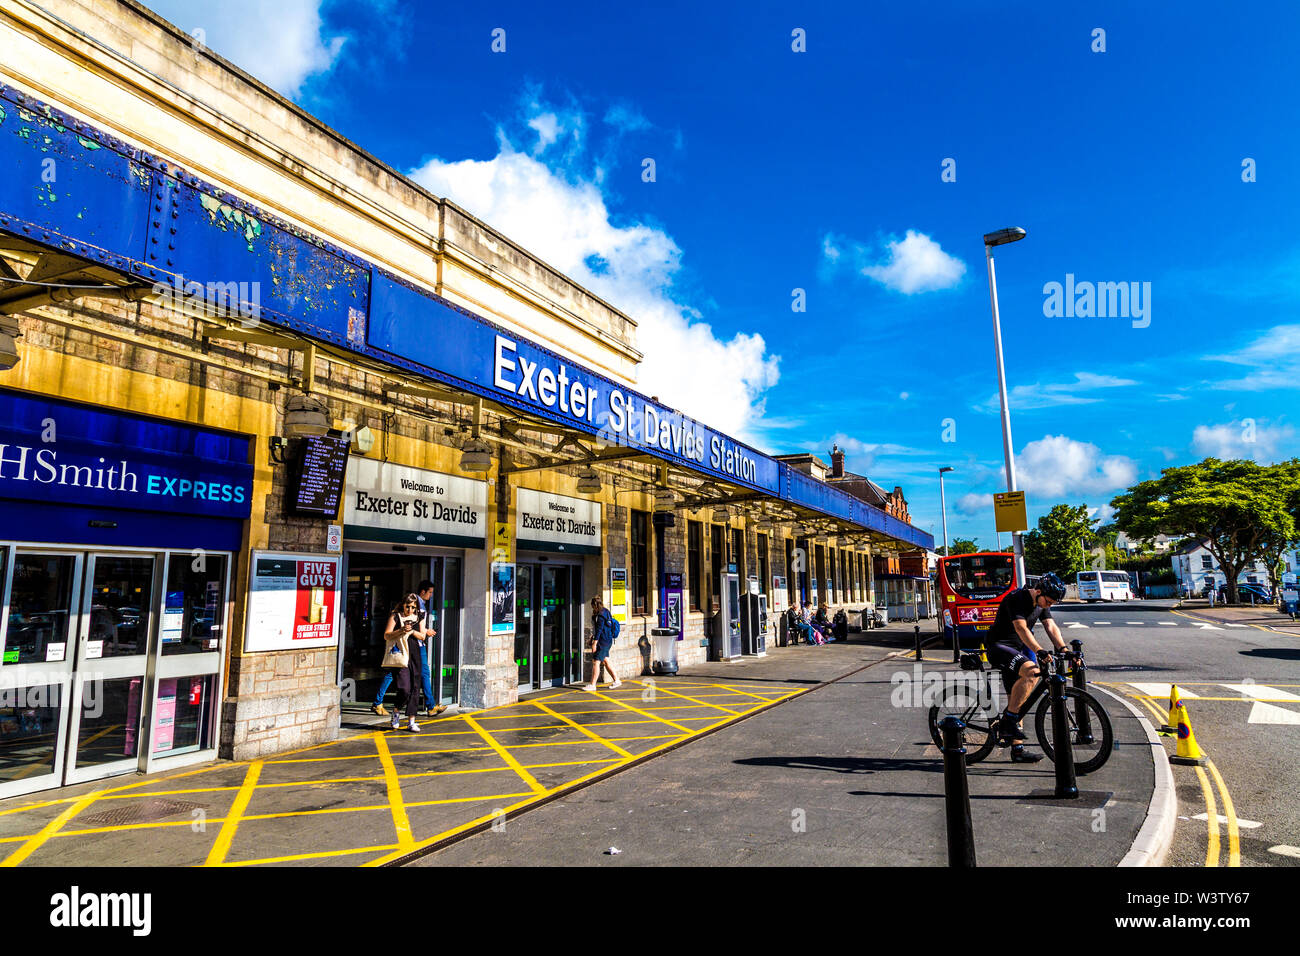 Entrance to the train station in Exeter St Davids, UK Stock Photo